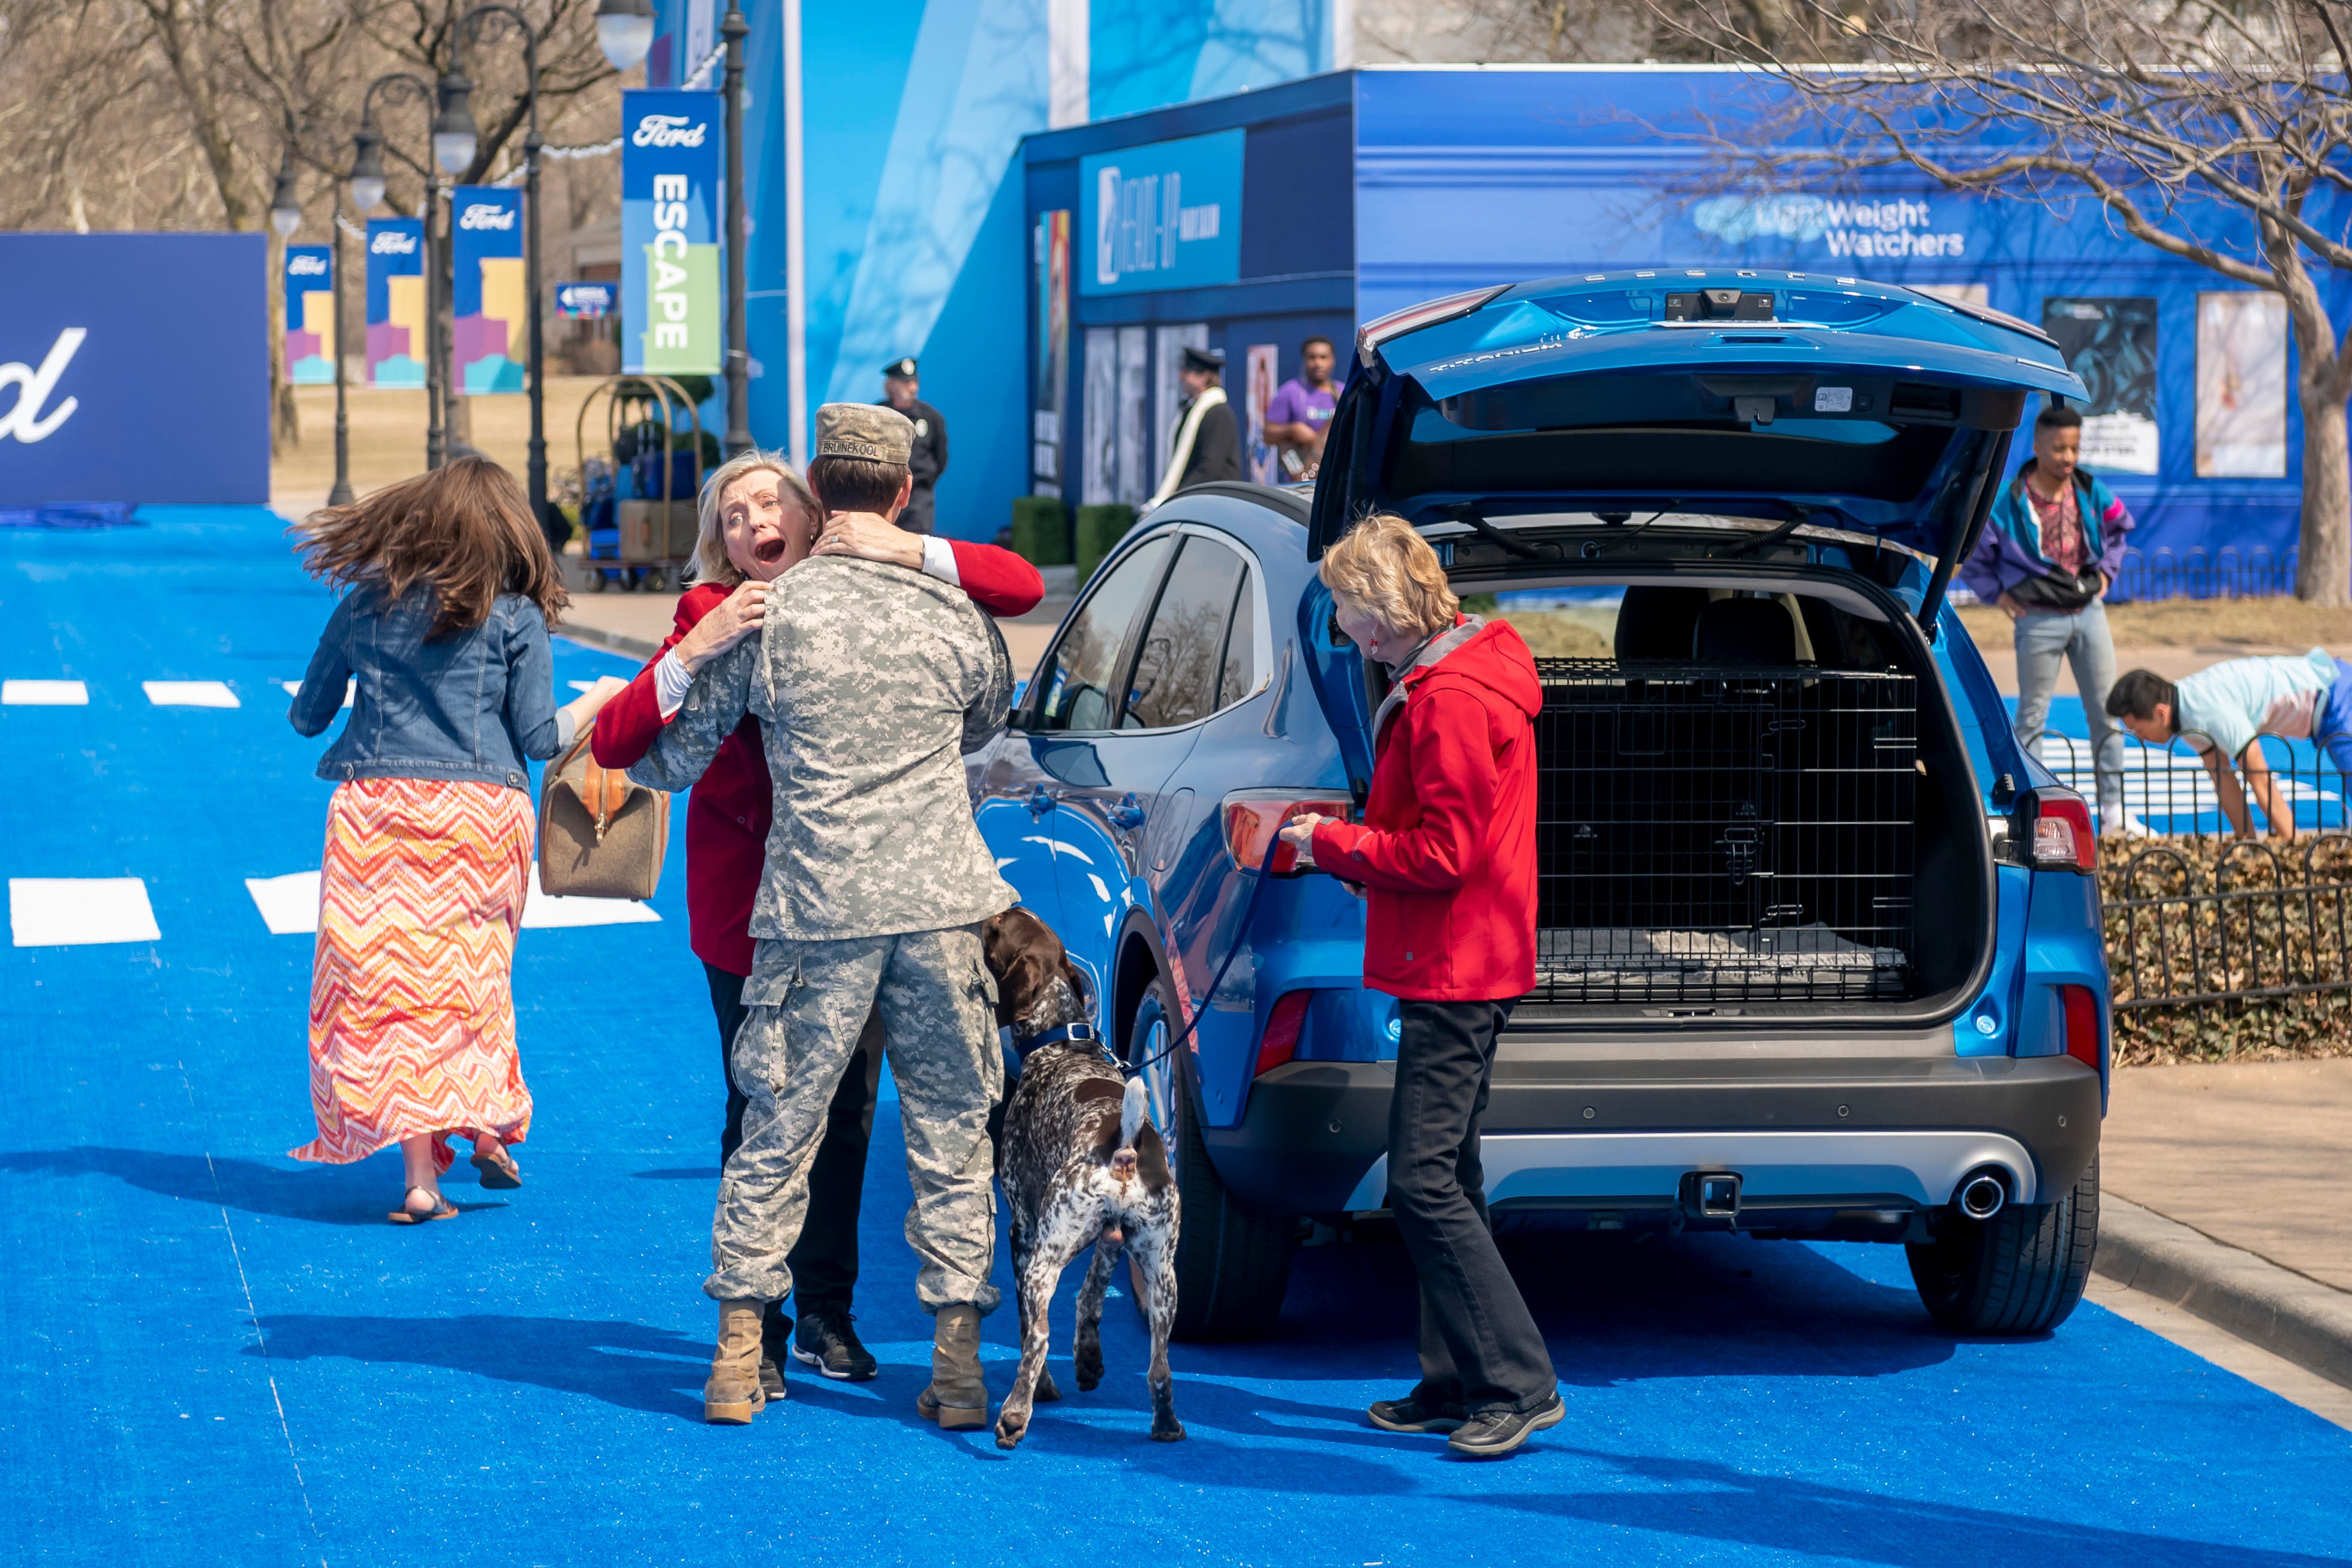 Actors participate in the reveal of the 2020 Ford Escape during a live performance at Greenfield Village. The actors simulated potentially real scenarios from everyday living.